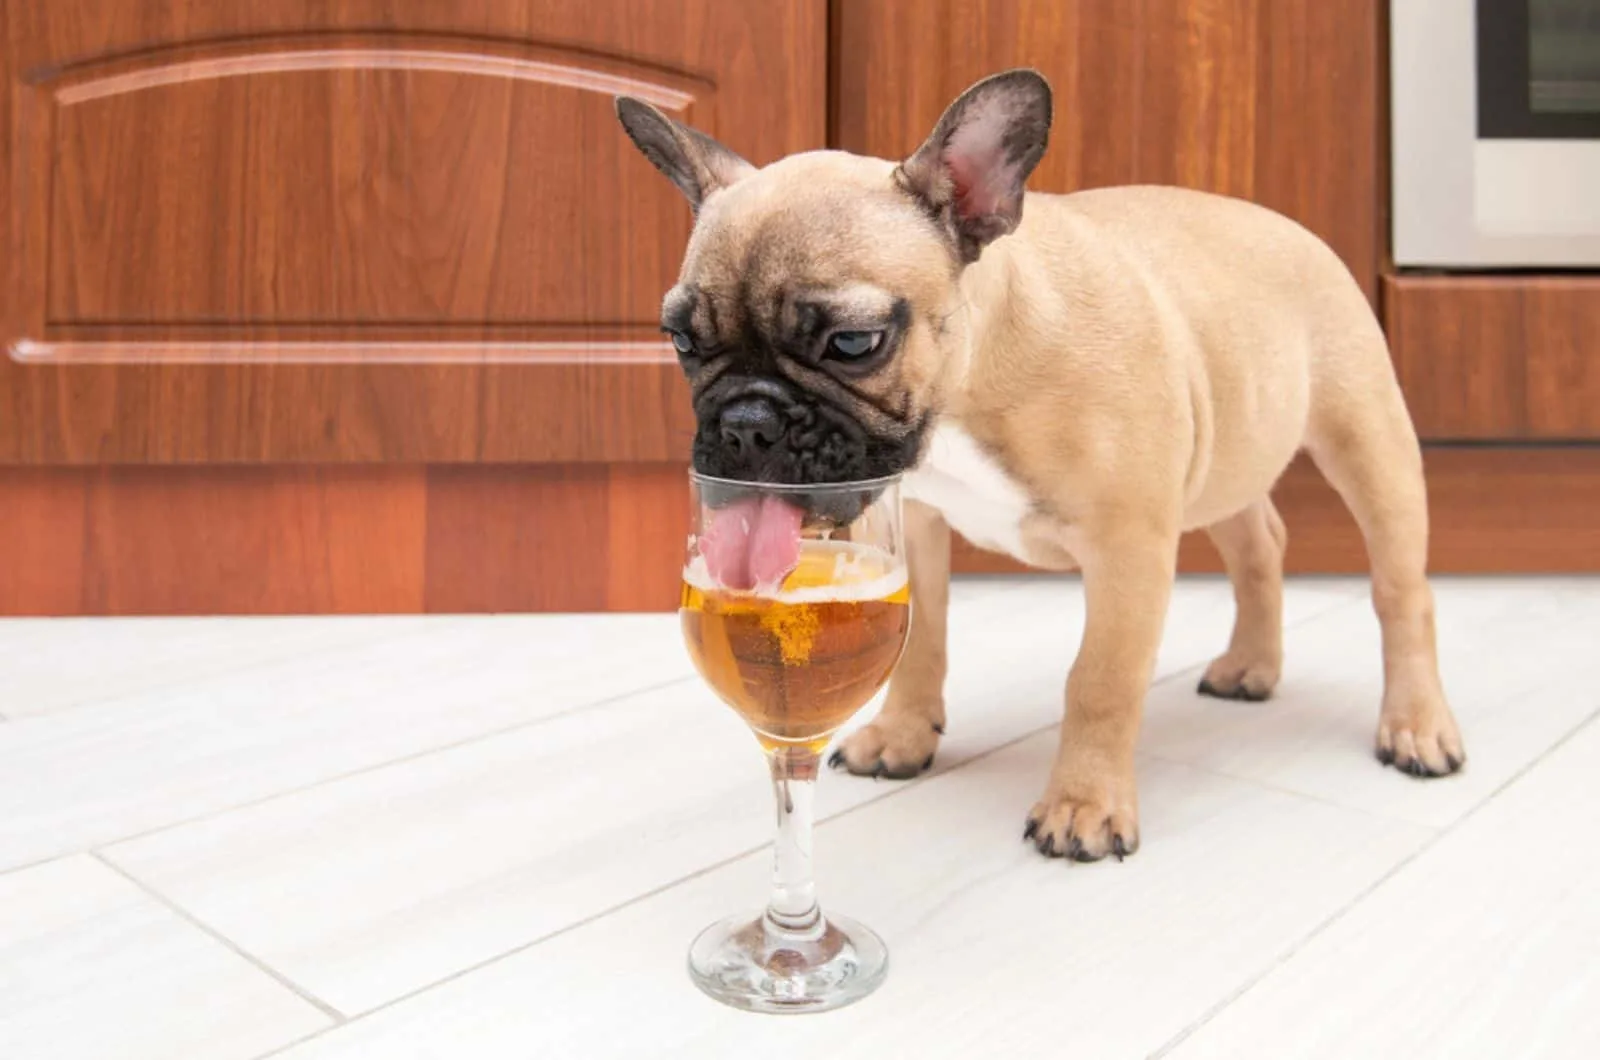 french bulldog puppy drinking beer from a glass